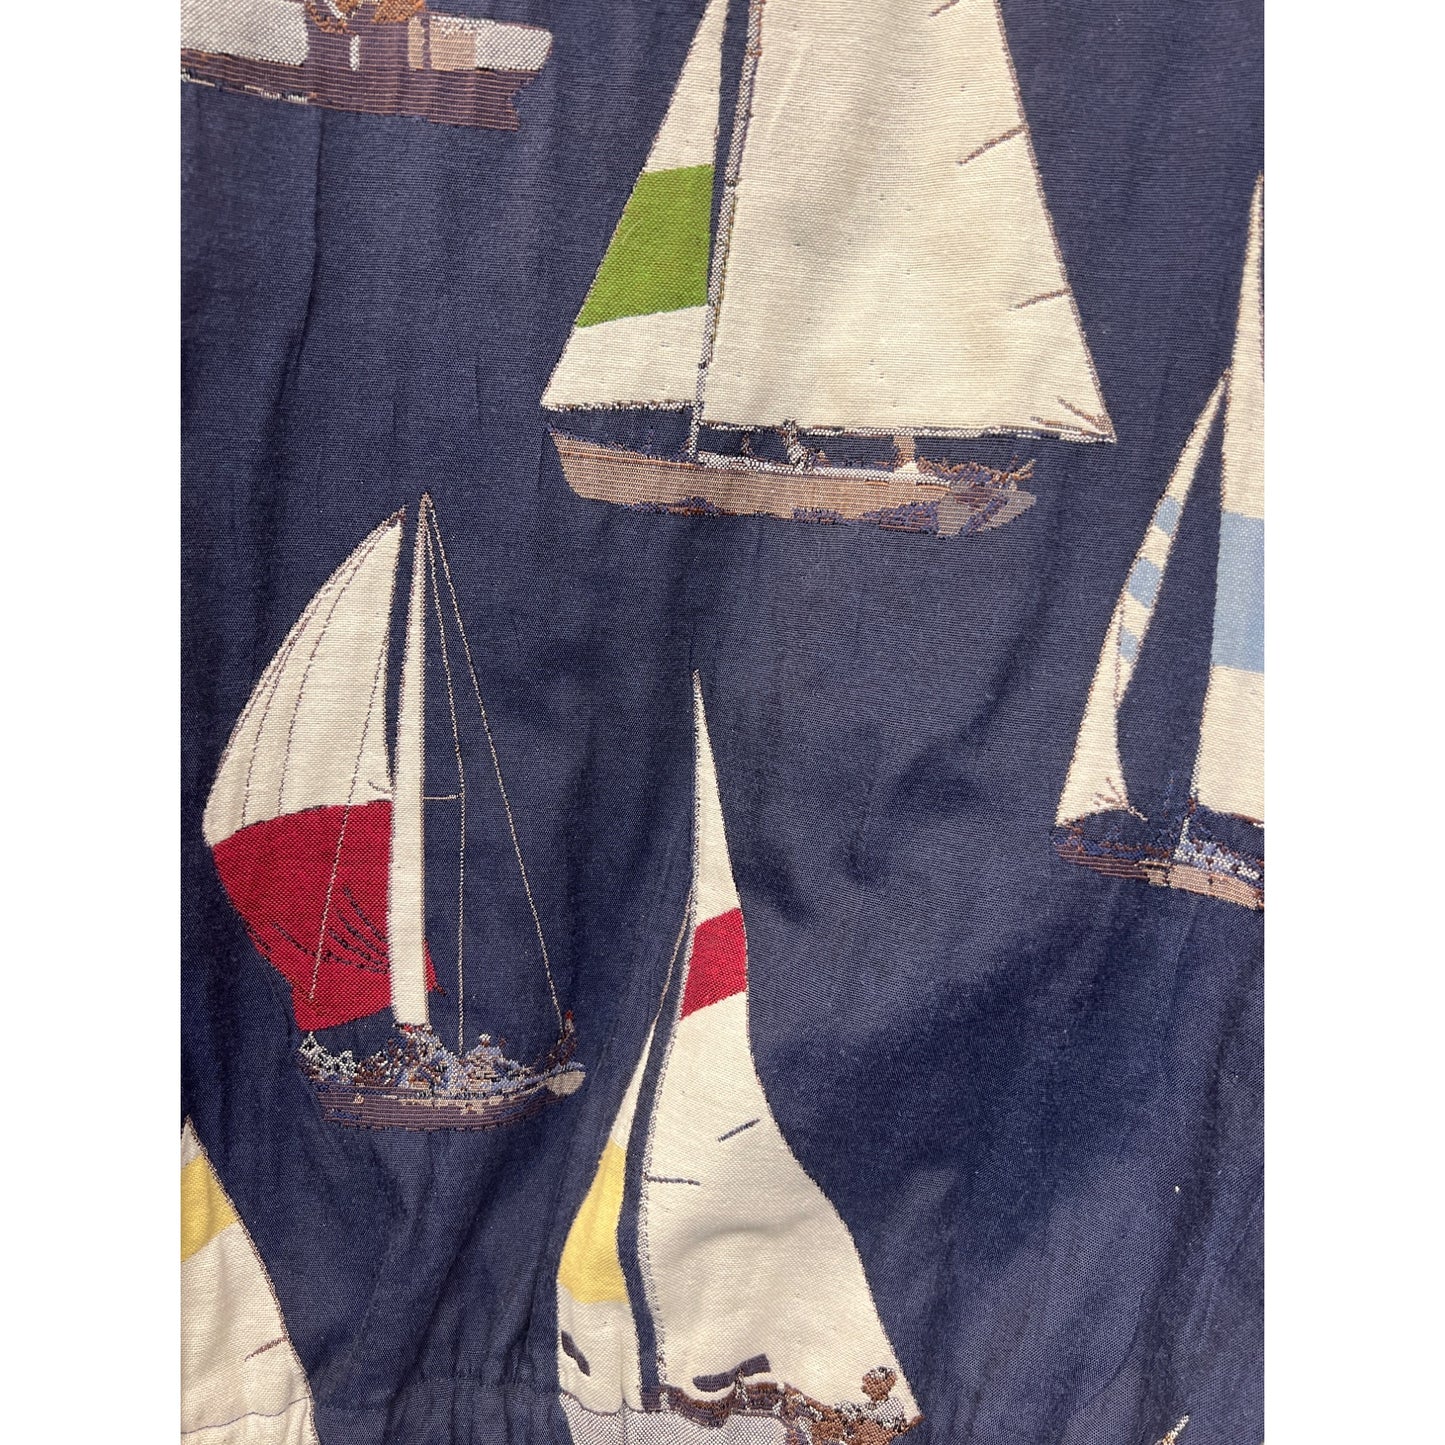 Just Jackets by CPF Vintage Nautical Sailboat Jacket